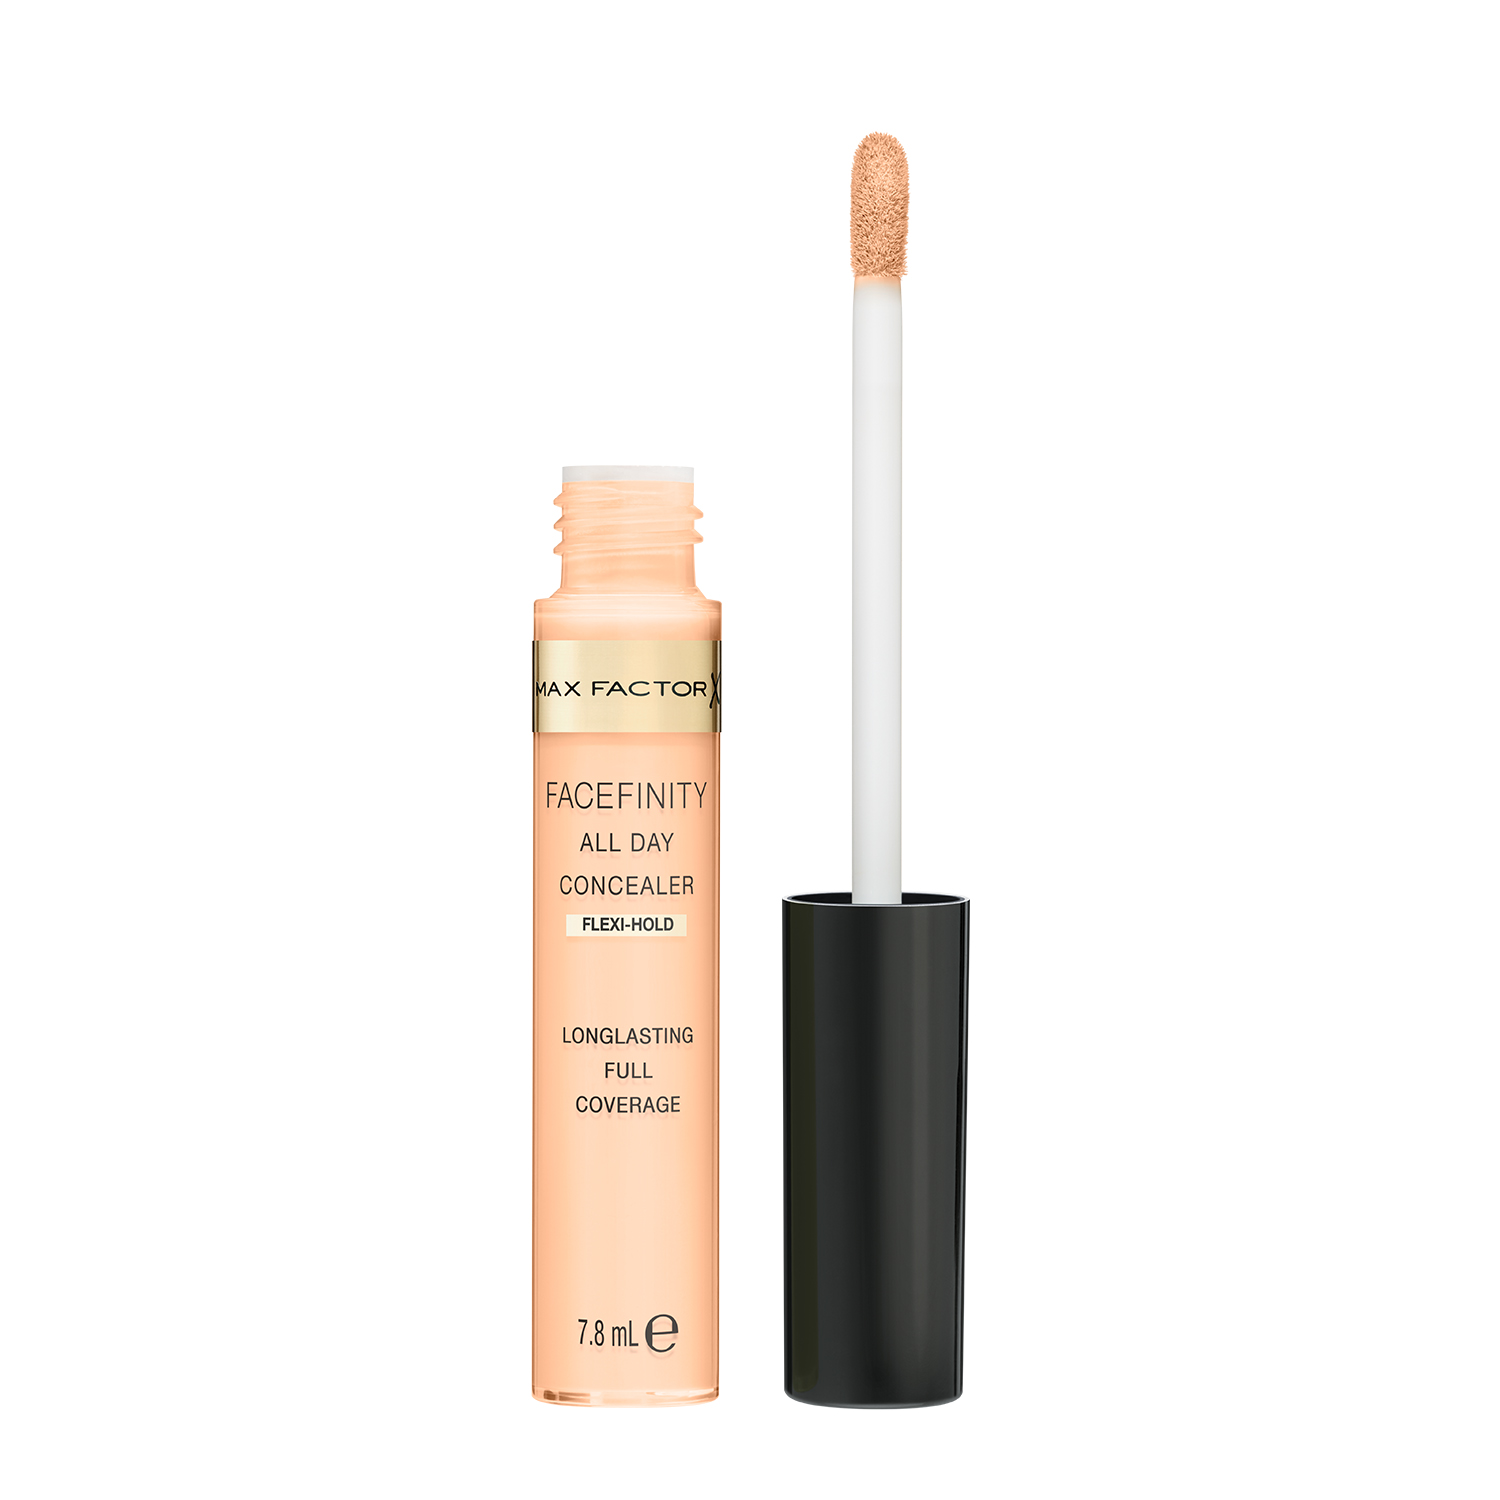 Консилер Max Factor Facefinity All Day Concealer, тон 010, 7,8 мл (8000019012105) - фото 3